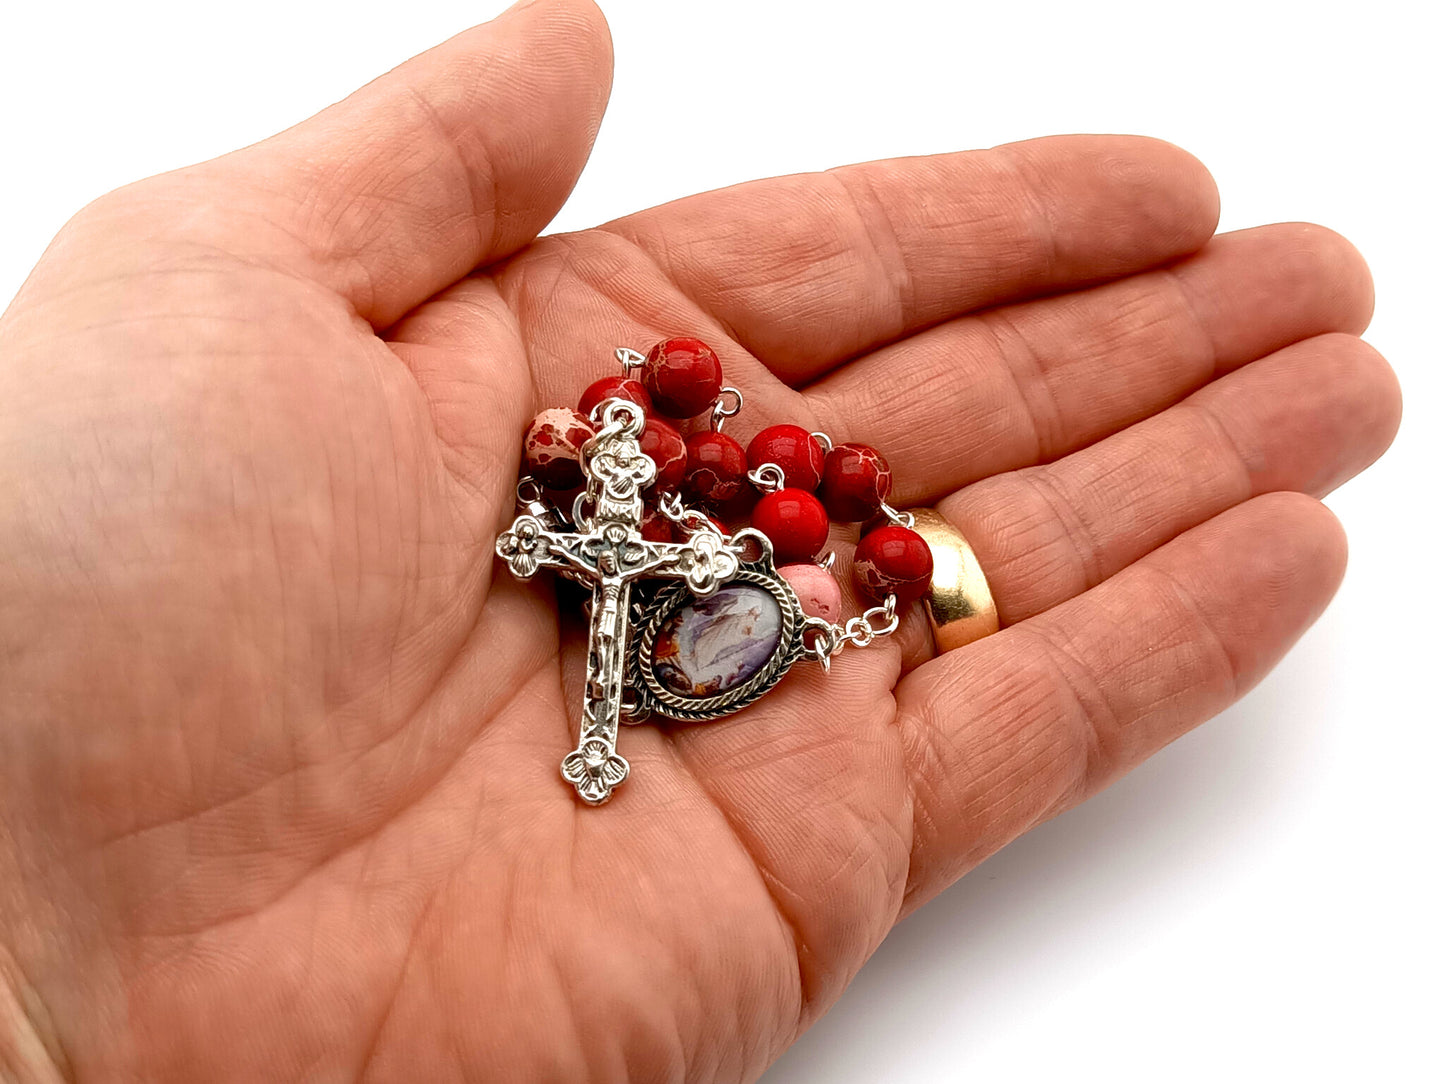 The Ascension unique rosary beads single decade rosary with red jasper beads, silver crosses, picture centre medal and crucifix.